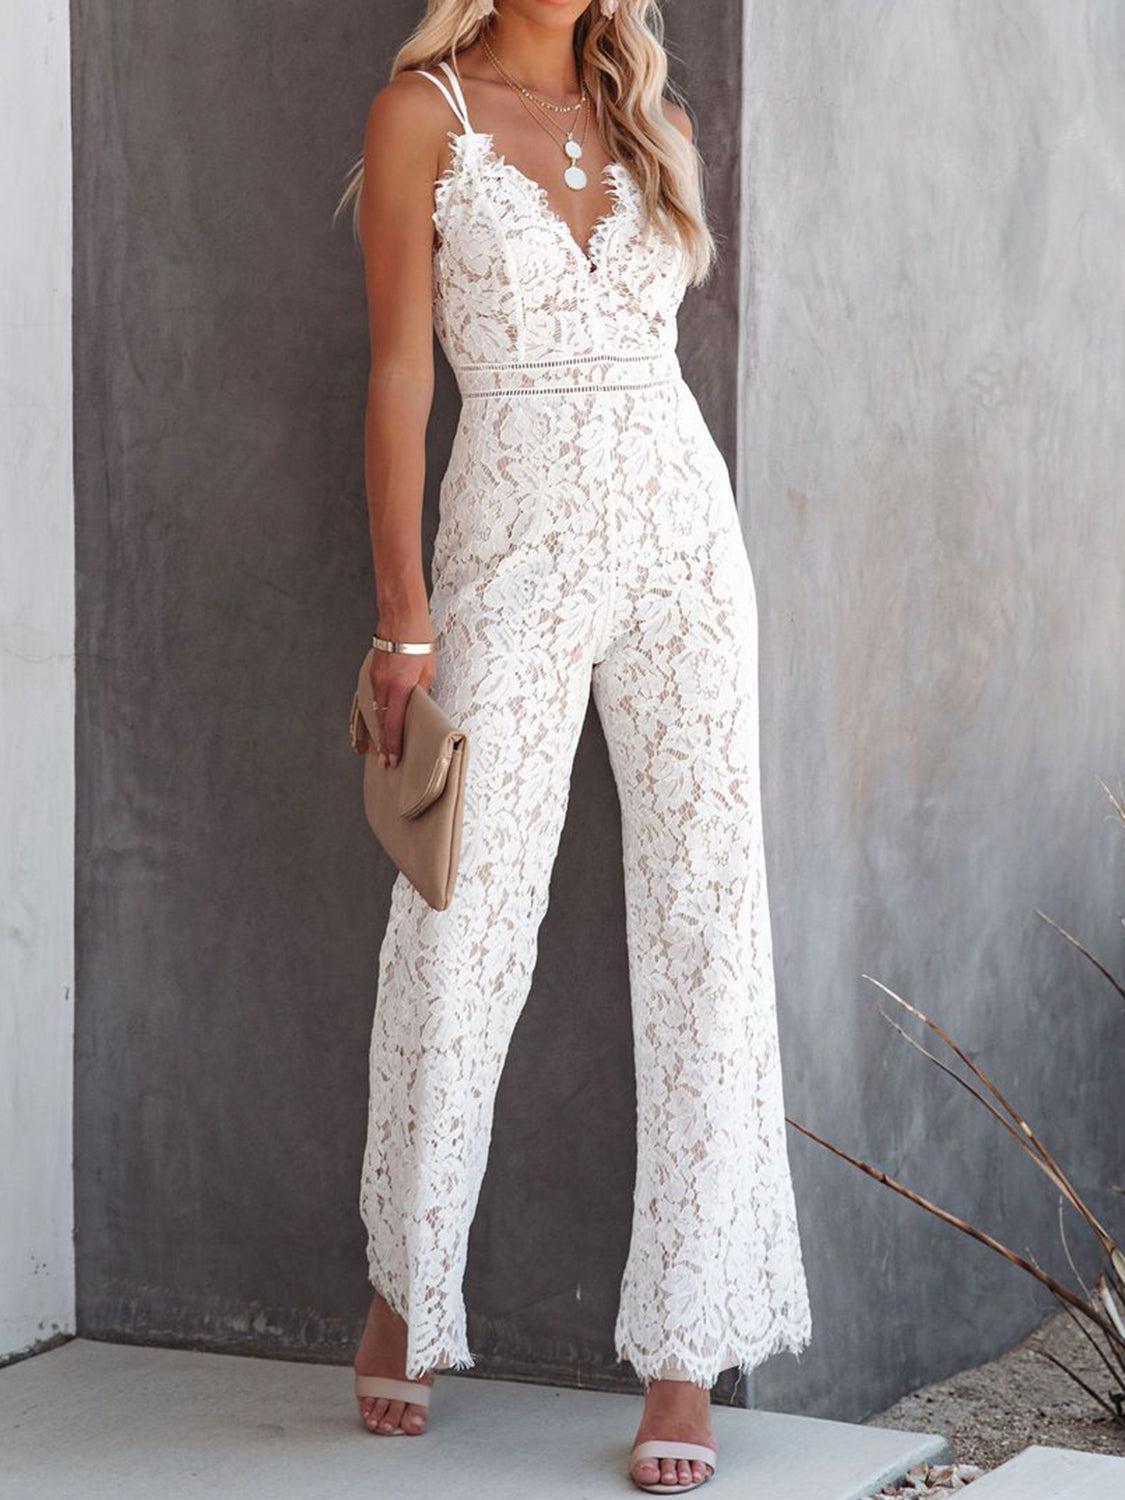 a woman wearing a white lace jumpsuit